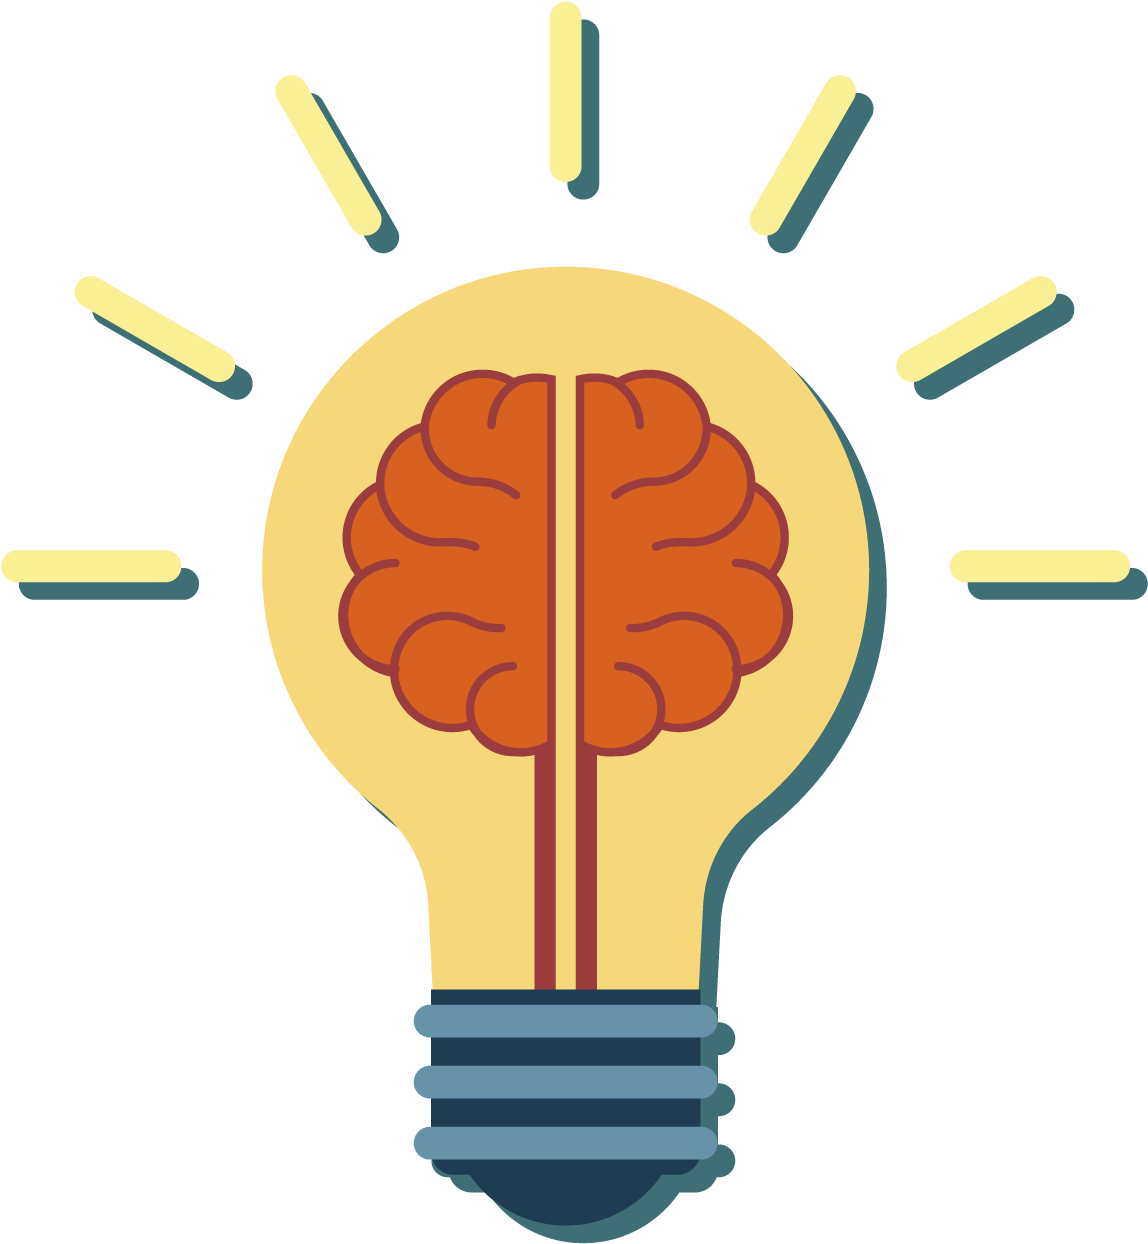 You Know That Feeling When You've Just Arrived At Work - Light Bulb Brain Vector Png (1500x1500)